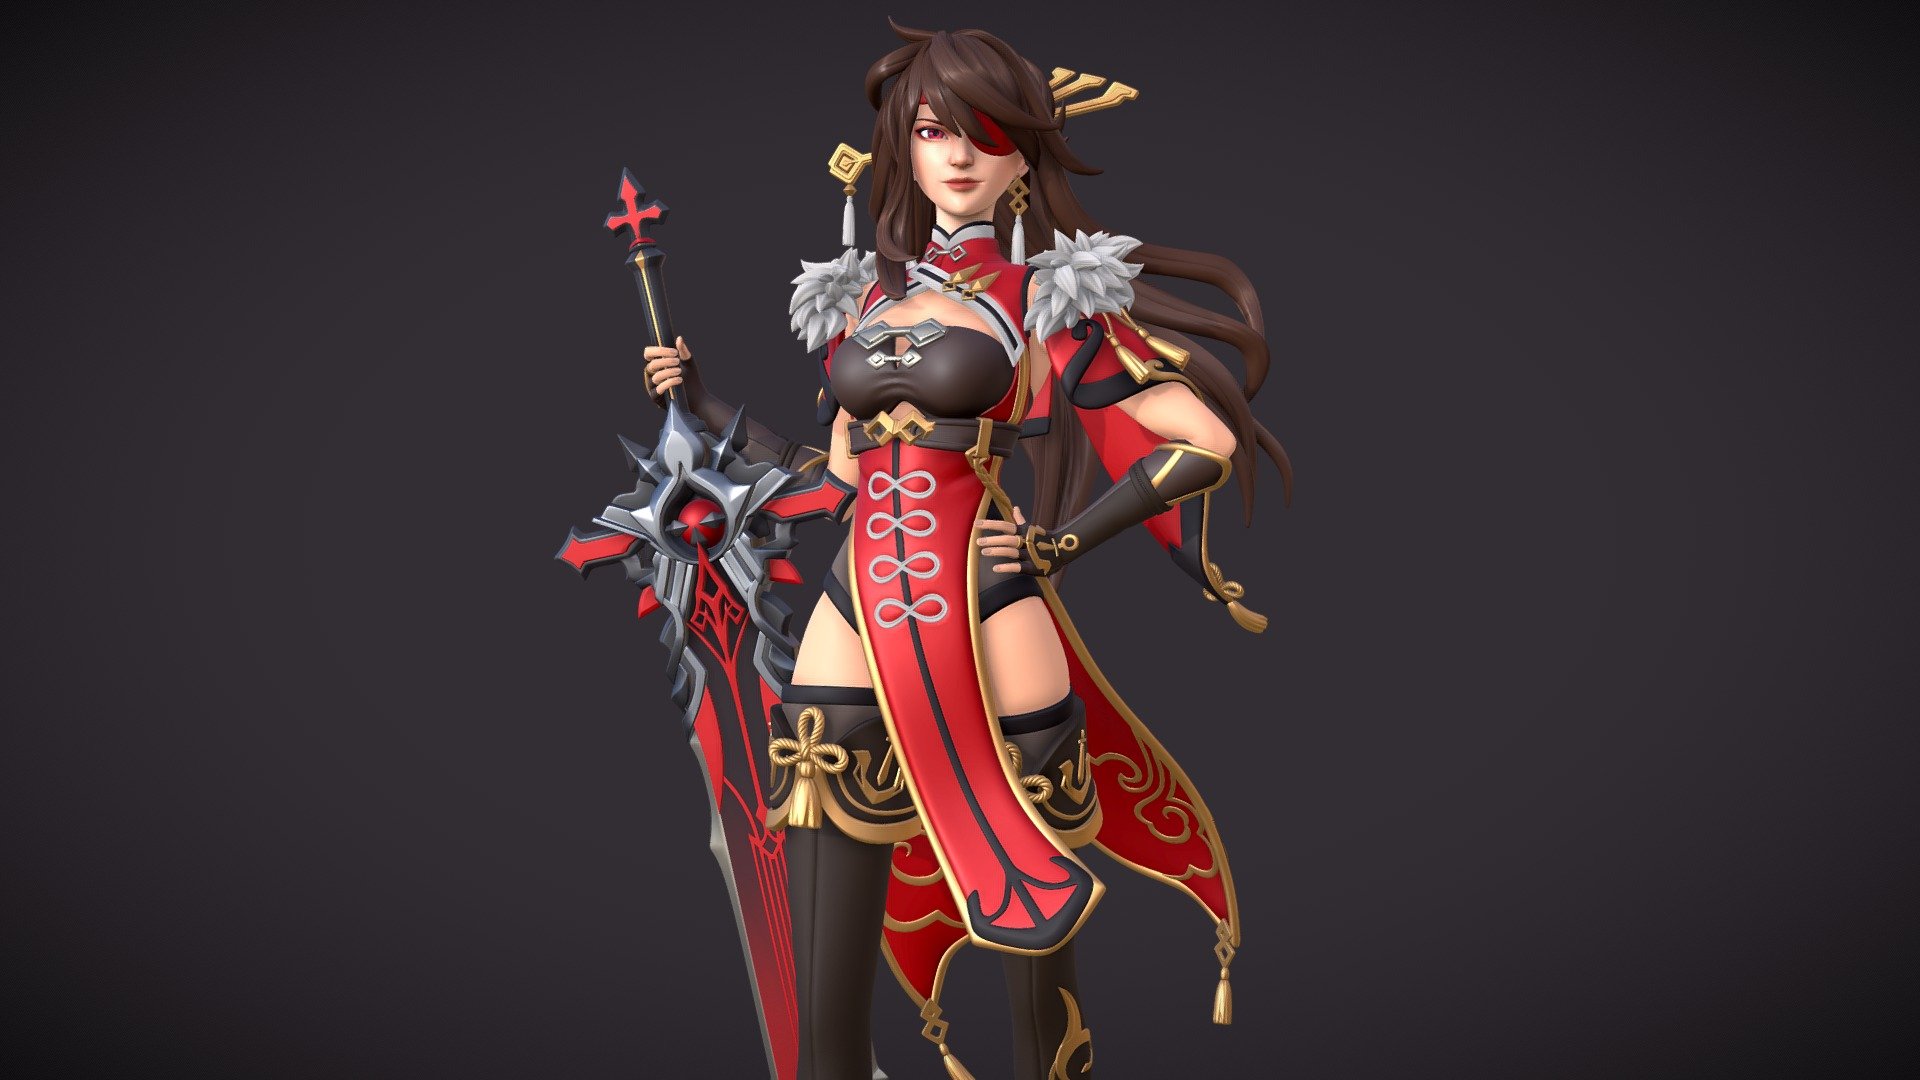 Fanart model of my favorite Genshin Impact character. I've been dreaming of making an epic figure with her since I started playing and it's finally finished!

More renders and beauty shots here:
https://www.artstation.com/artwork/VyvJd8 - Beidou Figure - 3D model by Alina Zhdanova (@ilandion.rise) 3d model